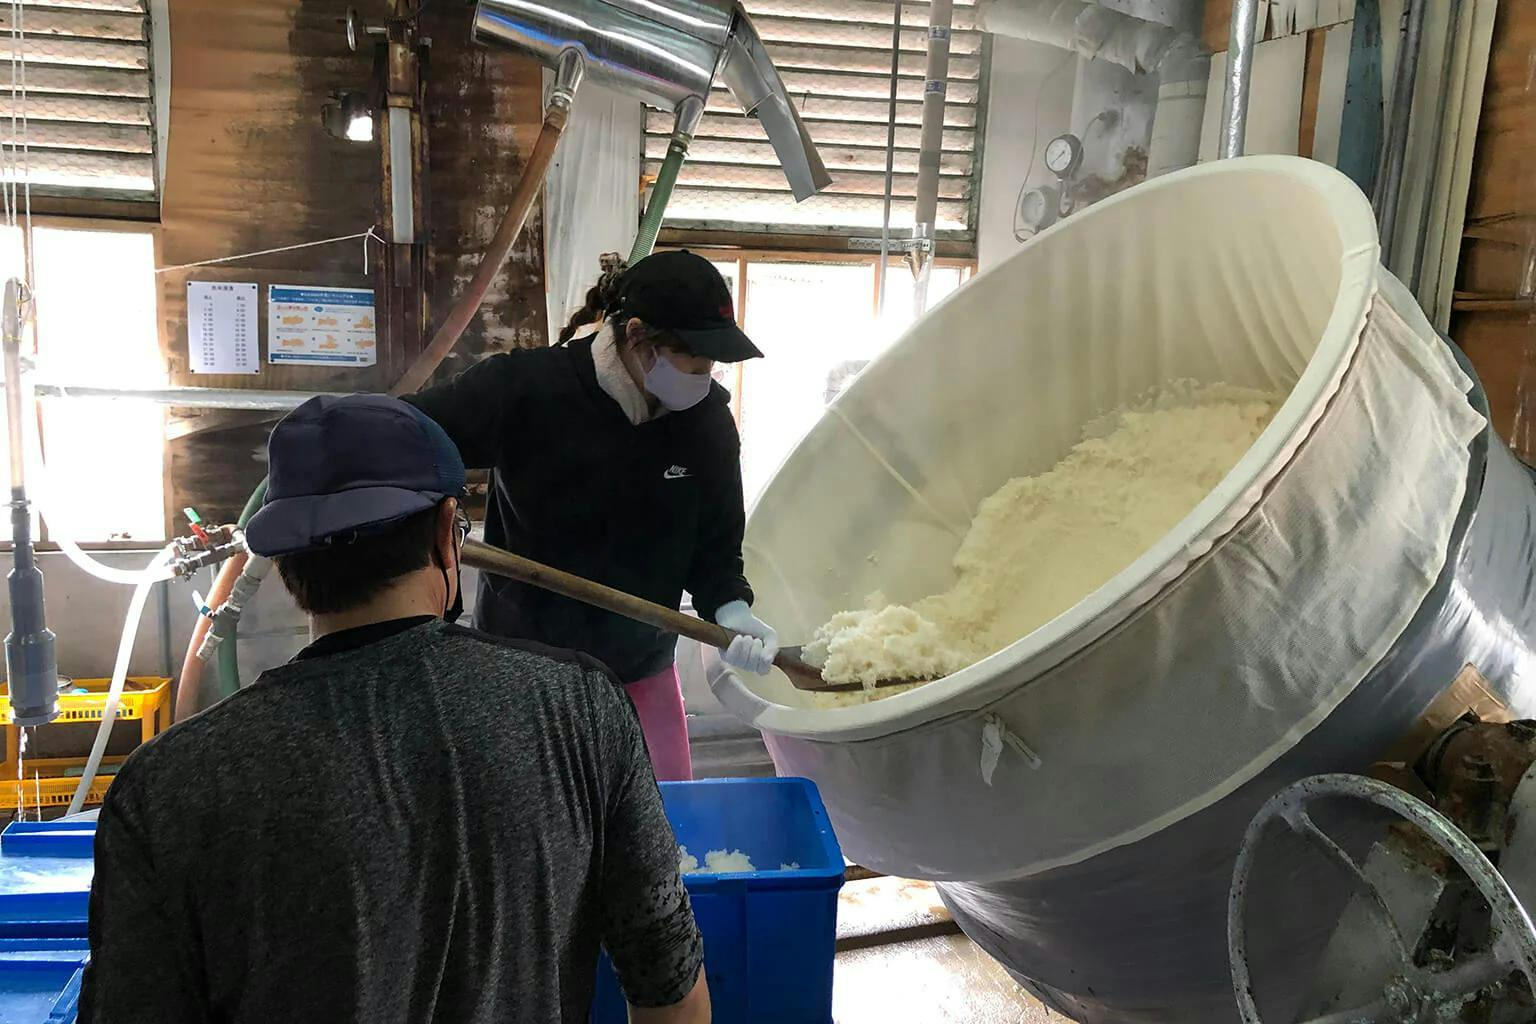 Rina shovels freshly steamed rice out of its tank. | Photo by Azusa K.